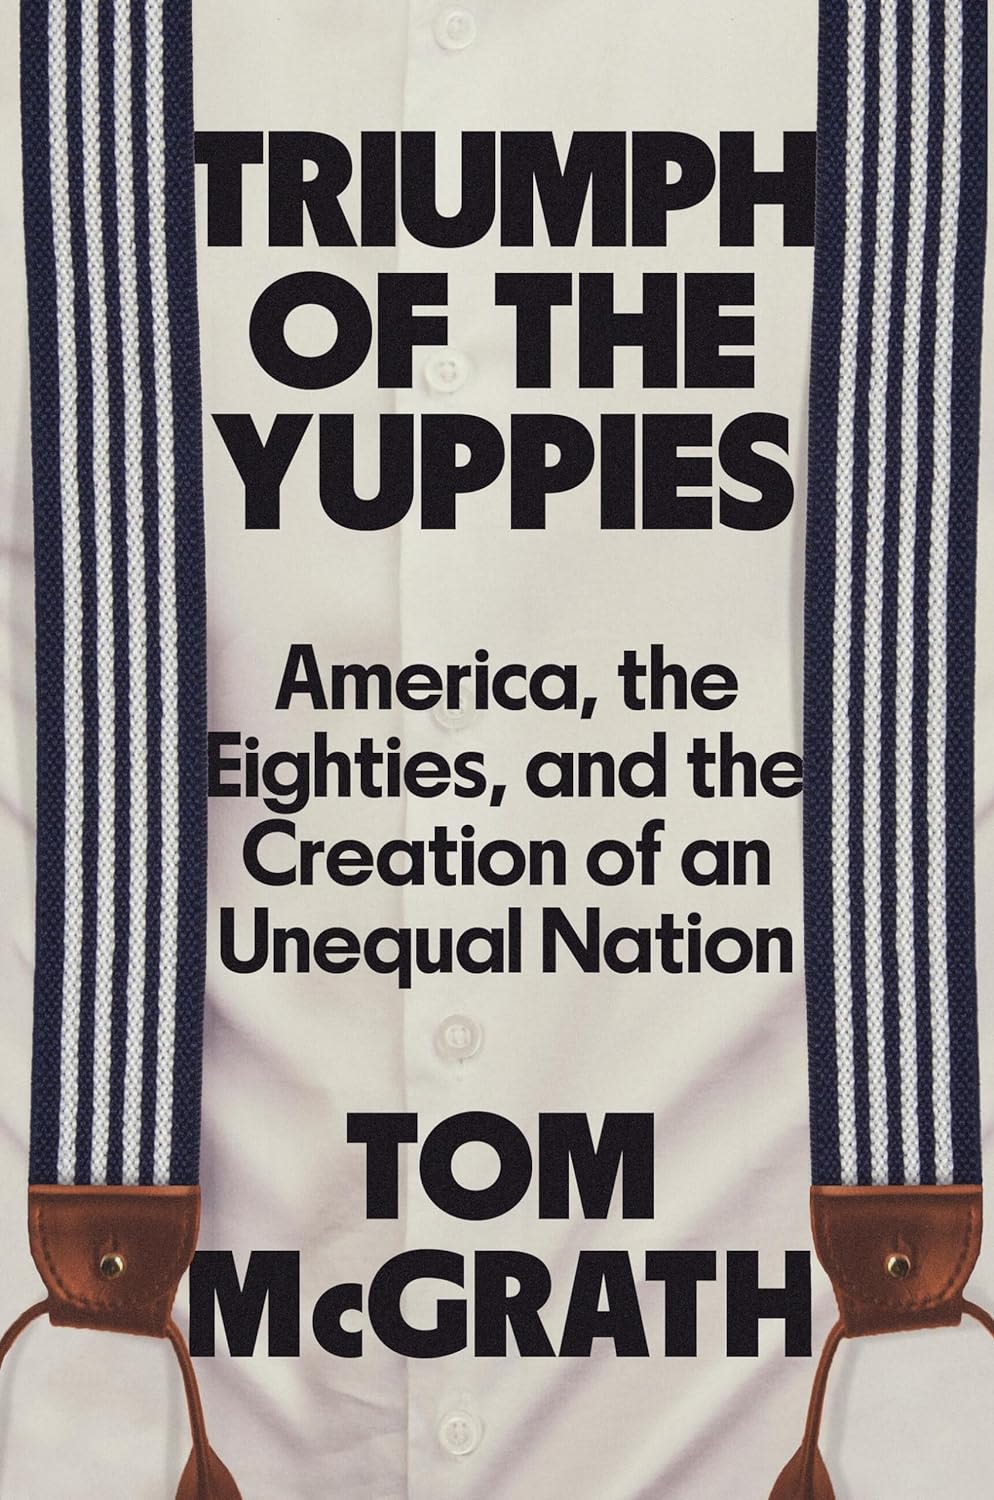 How Yuppies changed culture forever